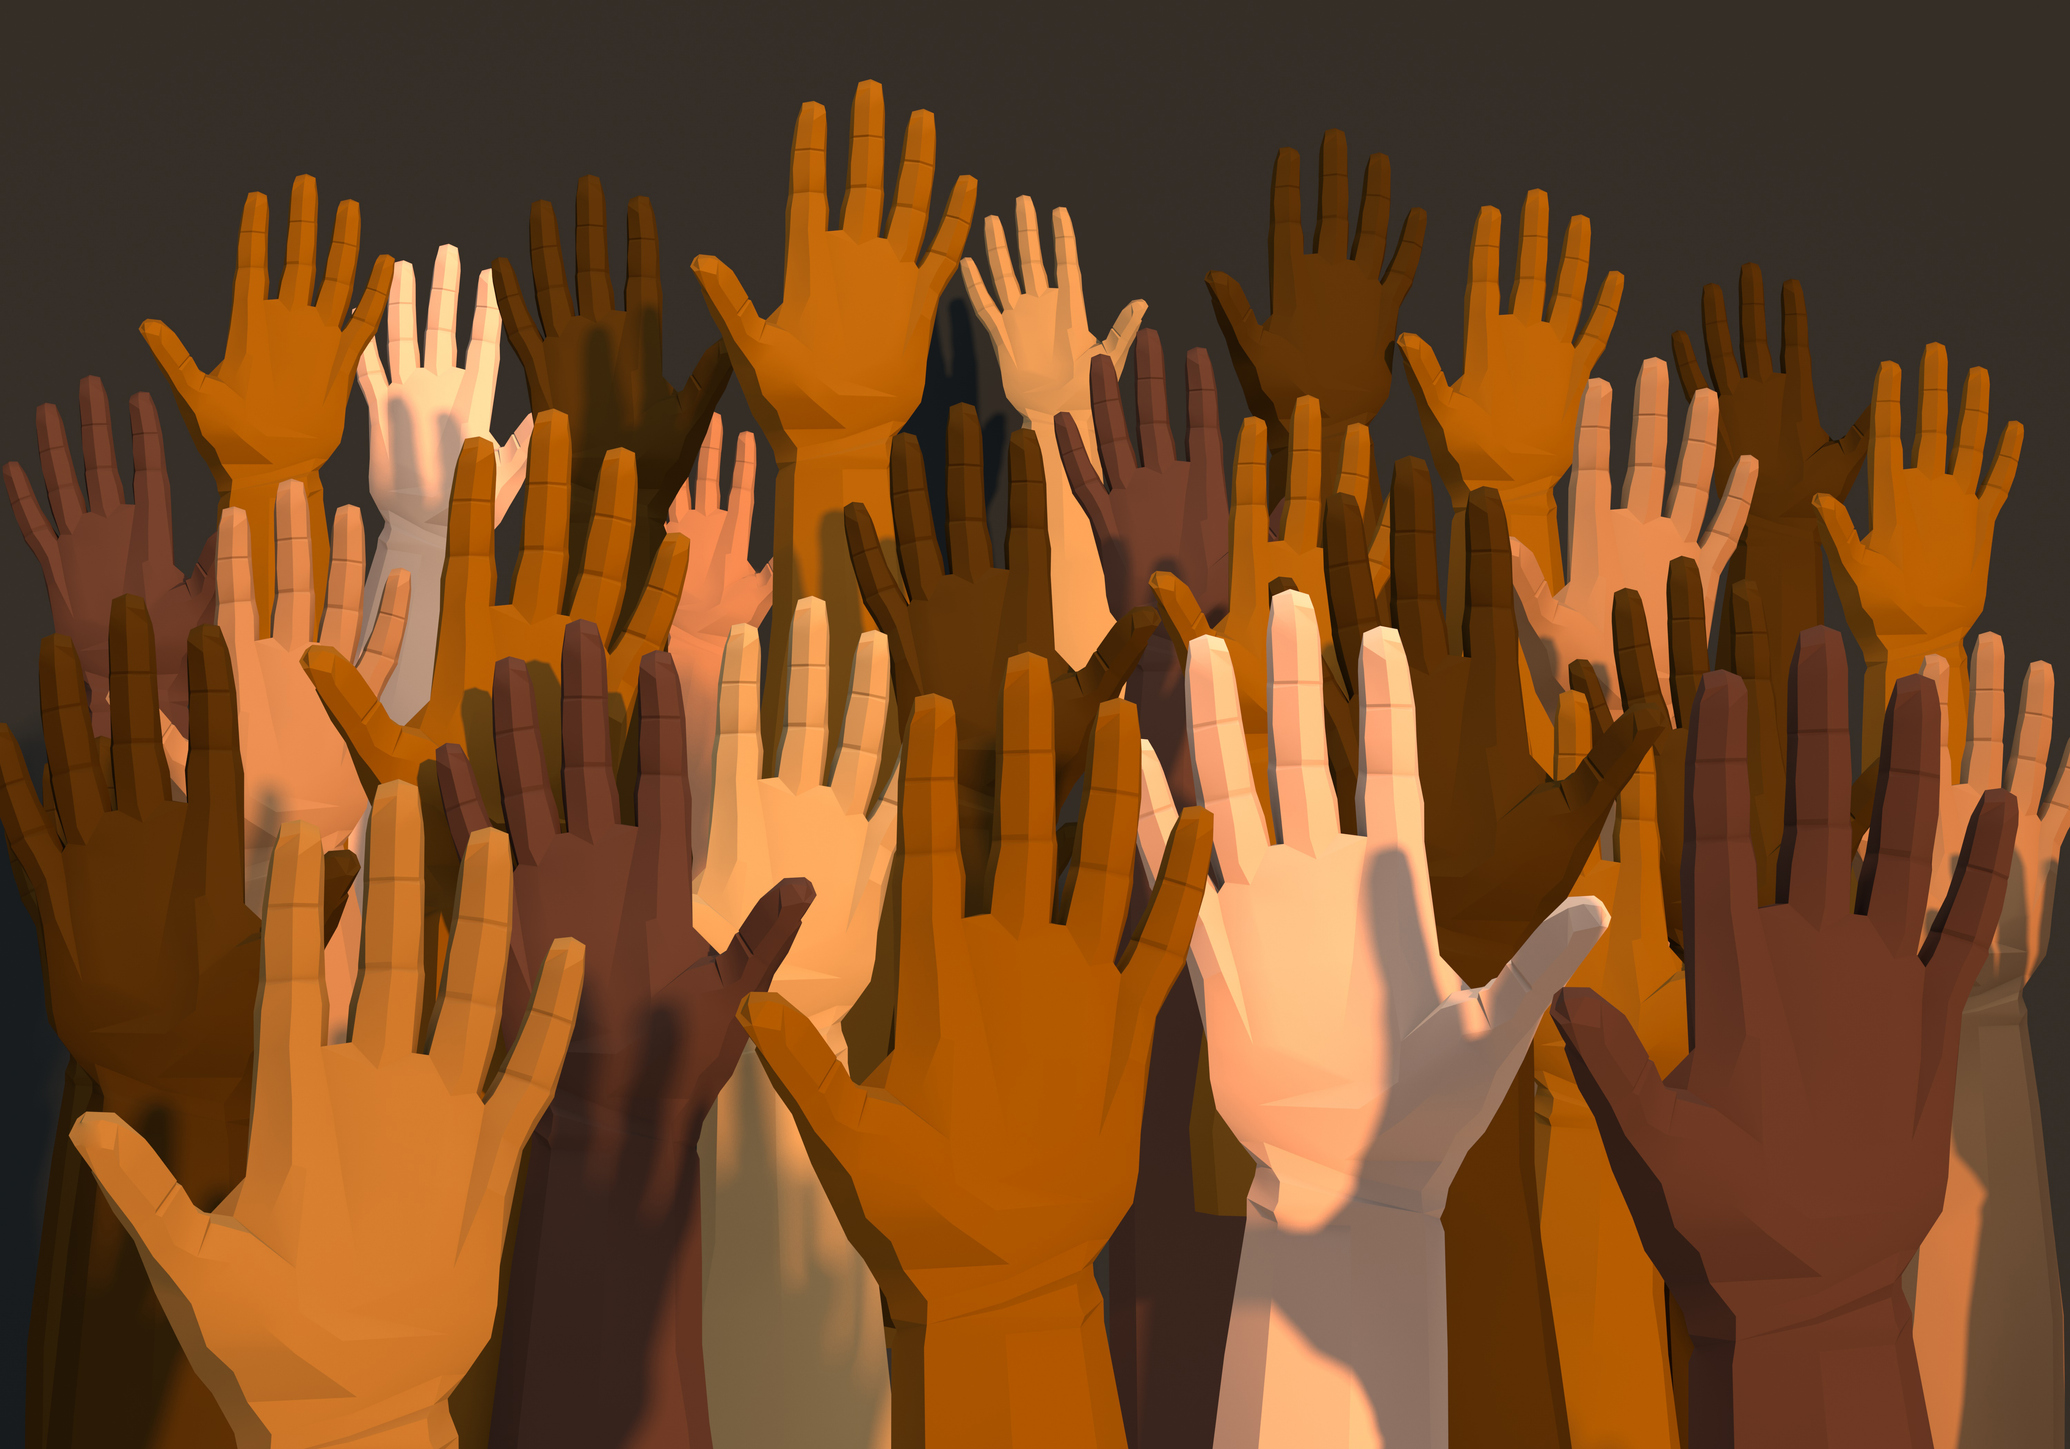 Digital generated image of multi-ethnic arms raised in the air on dark gray background.